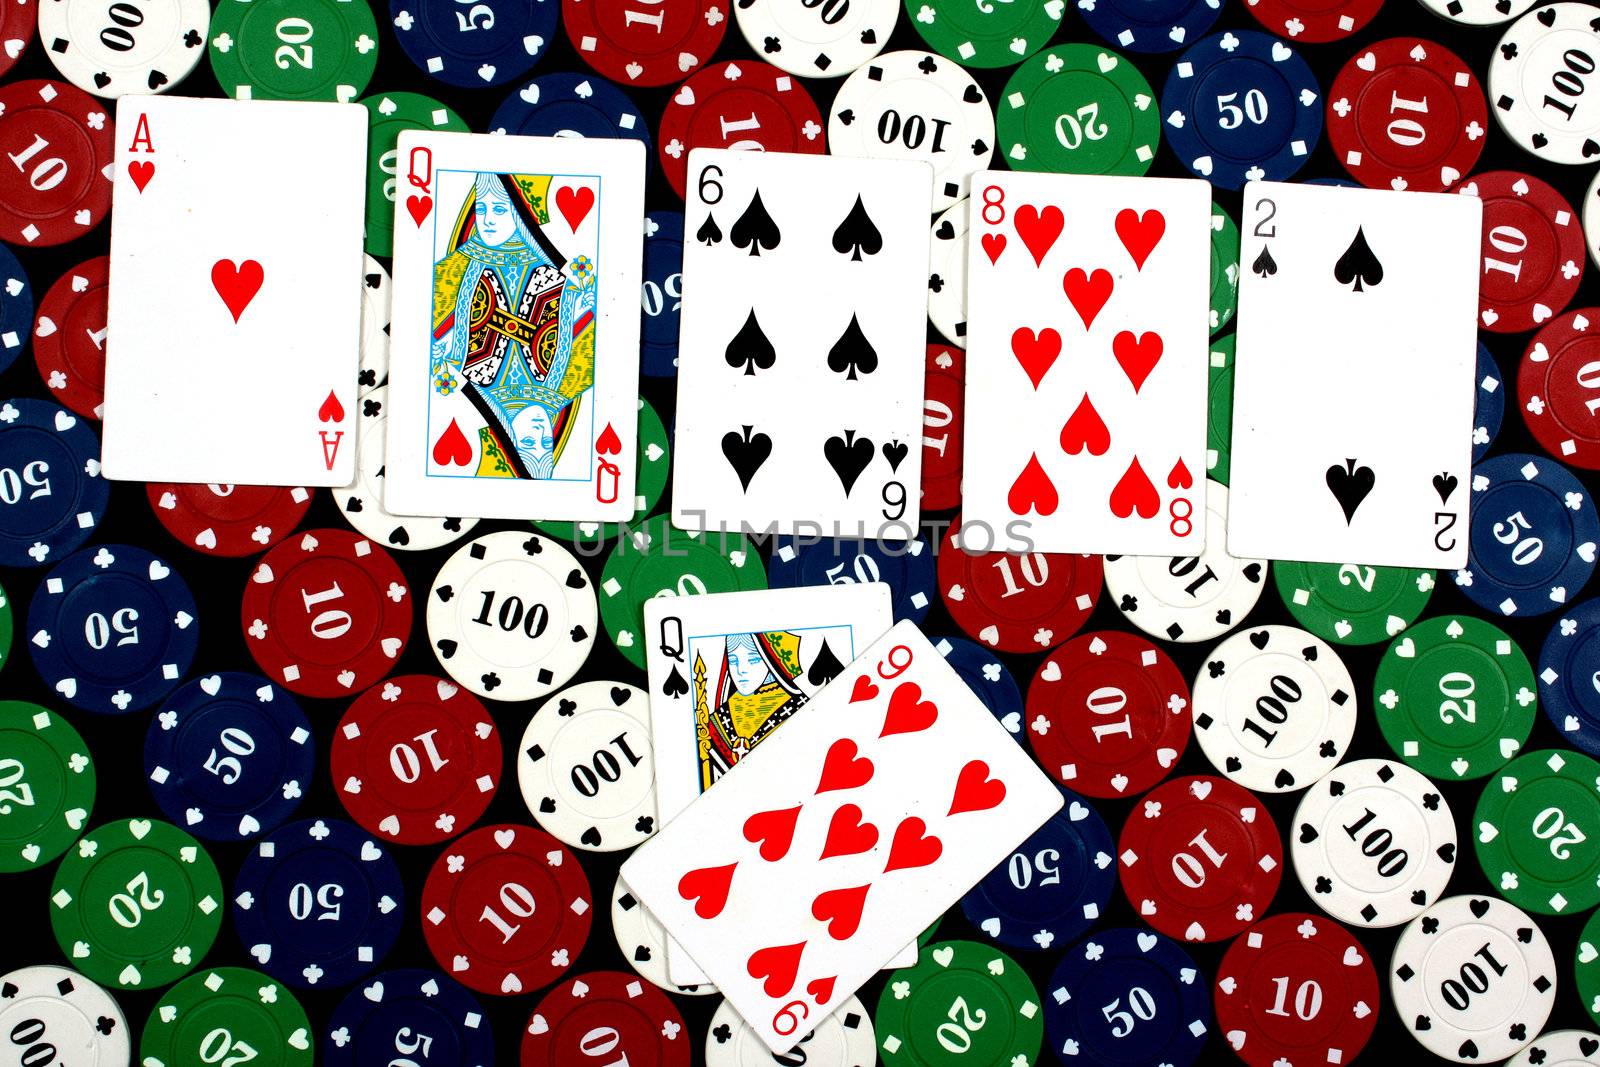 A poker hand of a pair of queens, on colorful gambling chips.